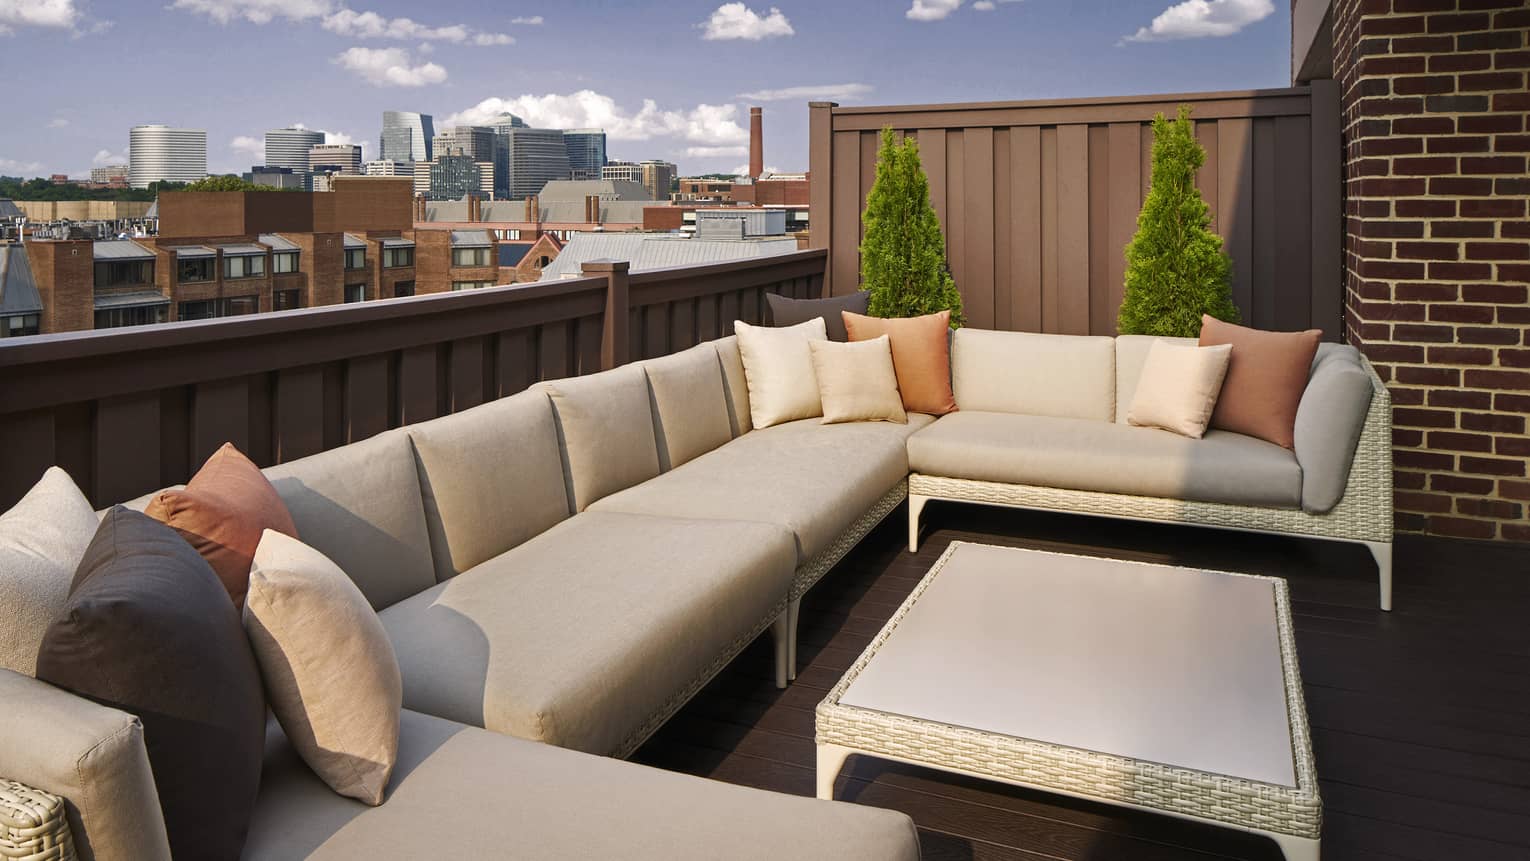 Expansive terrace with lounge seating